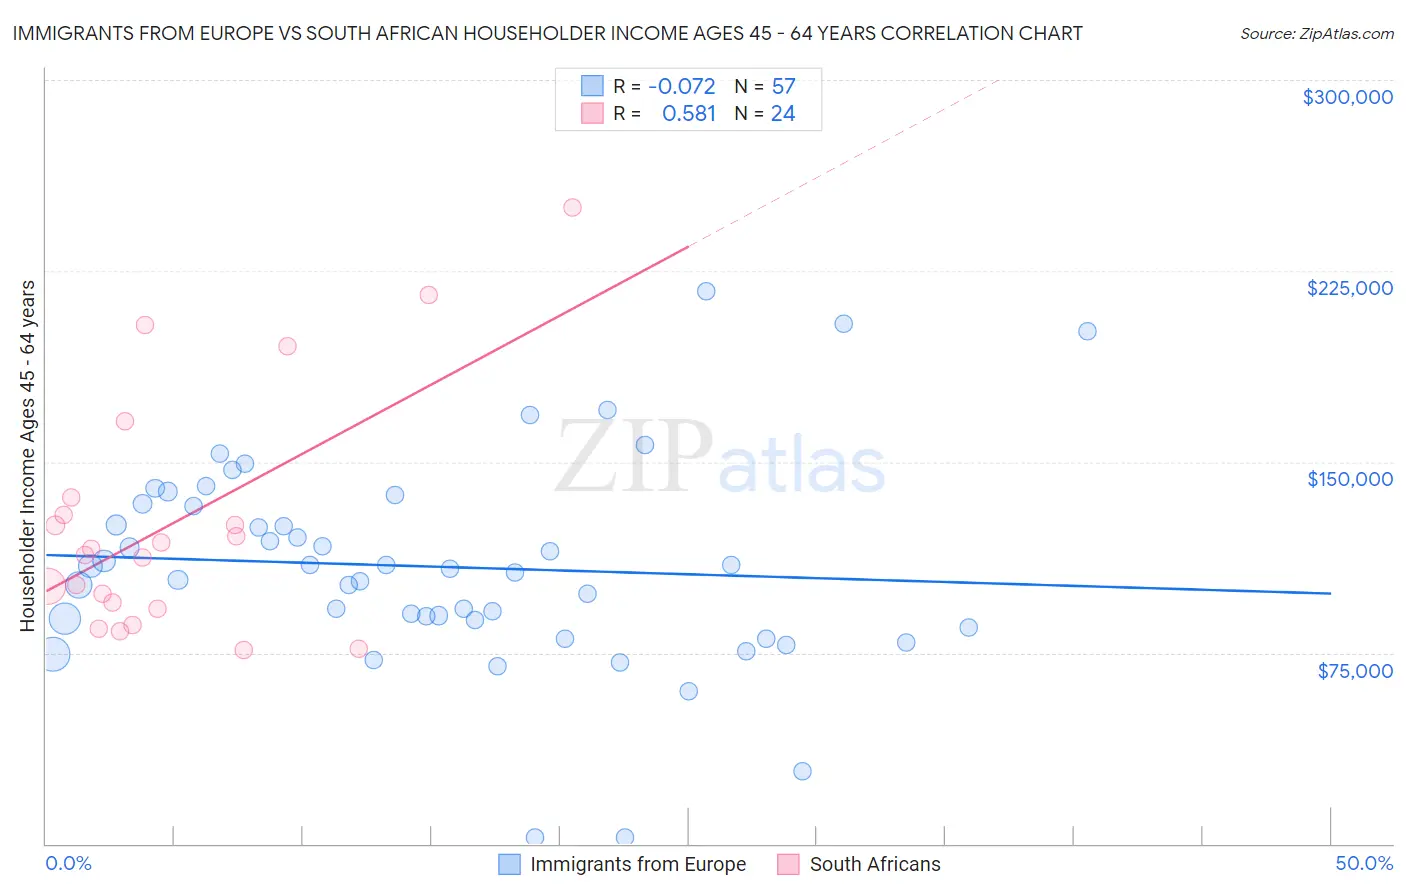 Immigrants from Europe vs South African Householder Income Ages 45 - 64 years